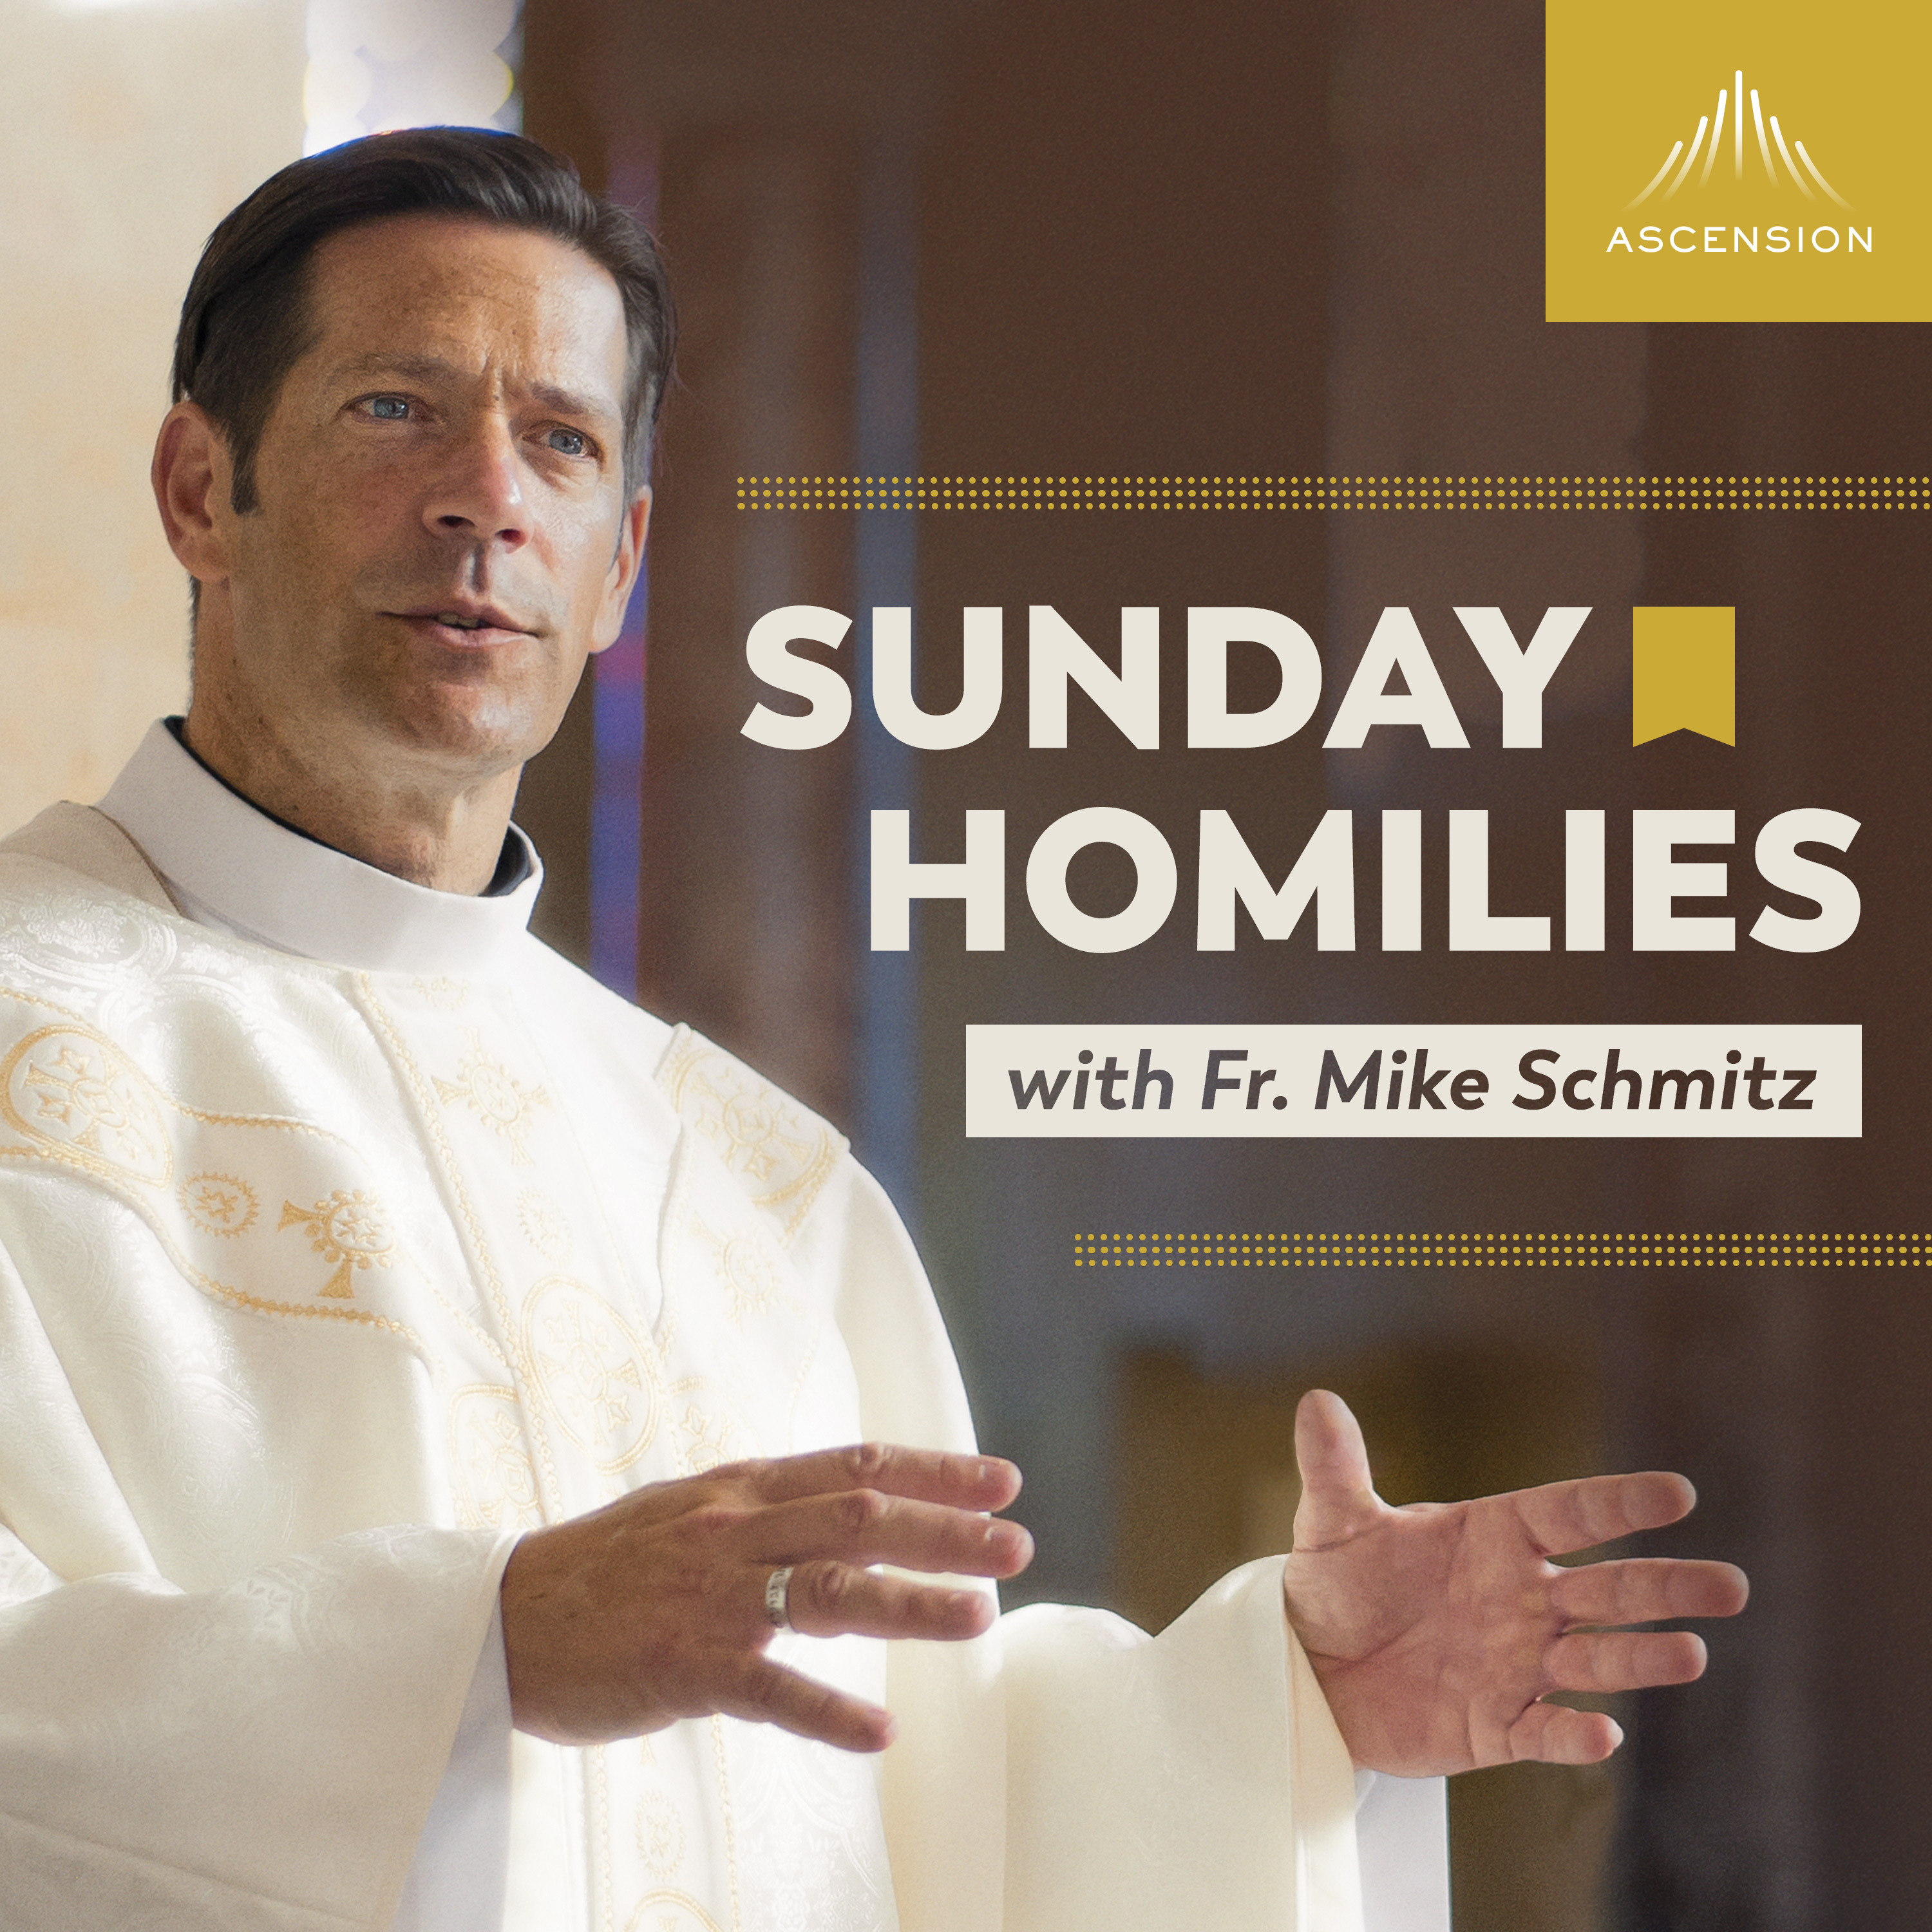 Sunday Homilies with Fr. Mike Schmitz